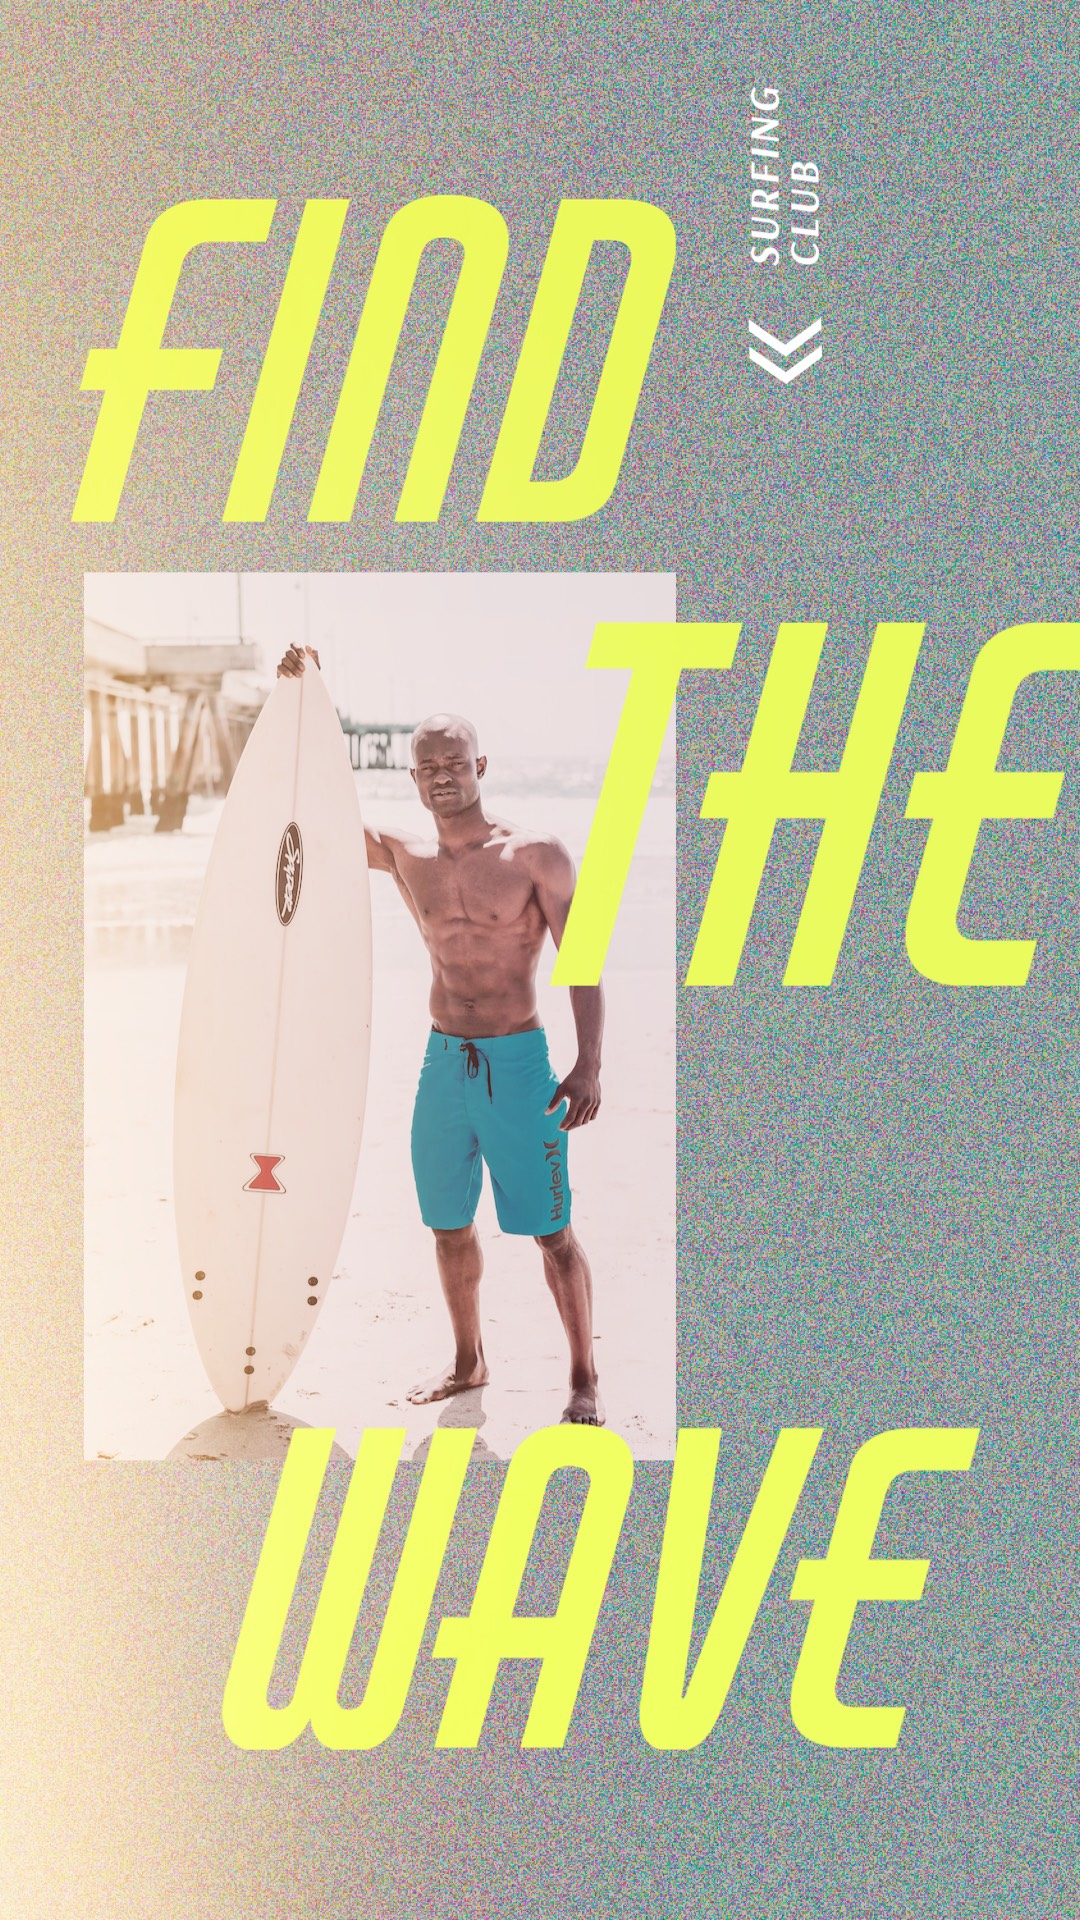 A Man Holding A Surfboard With The Words Find The Wave Summer Story Template